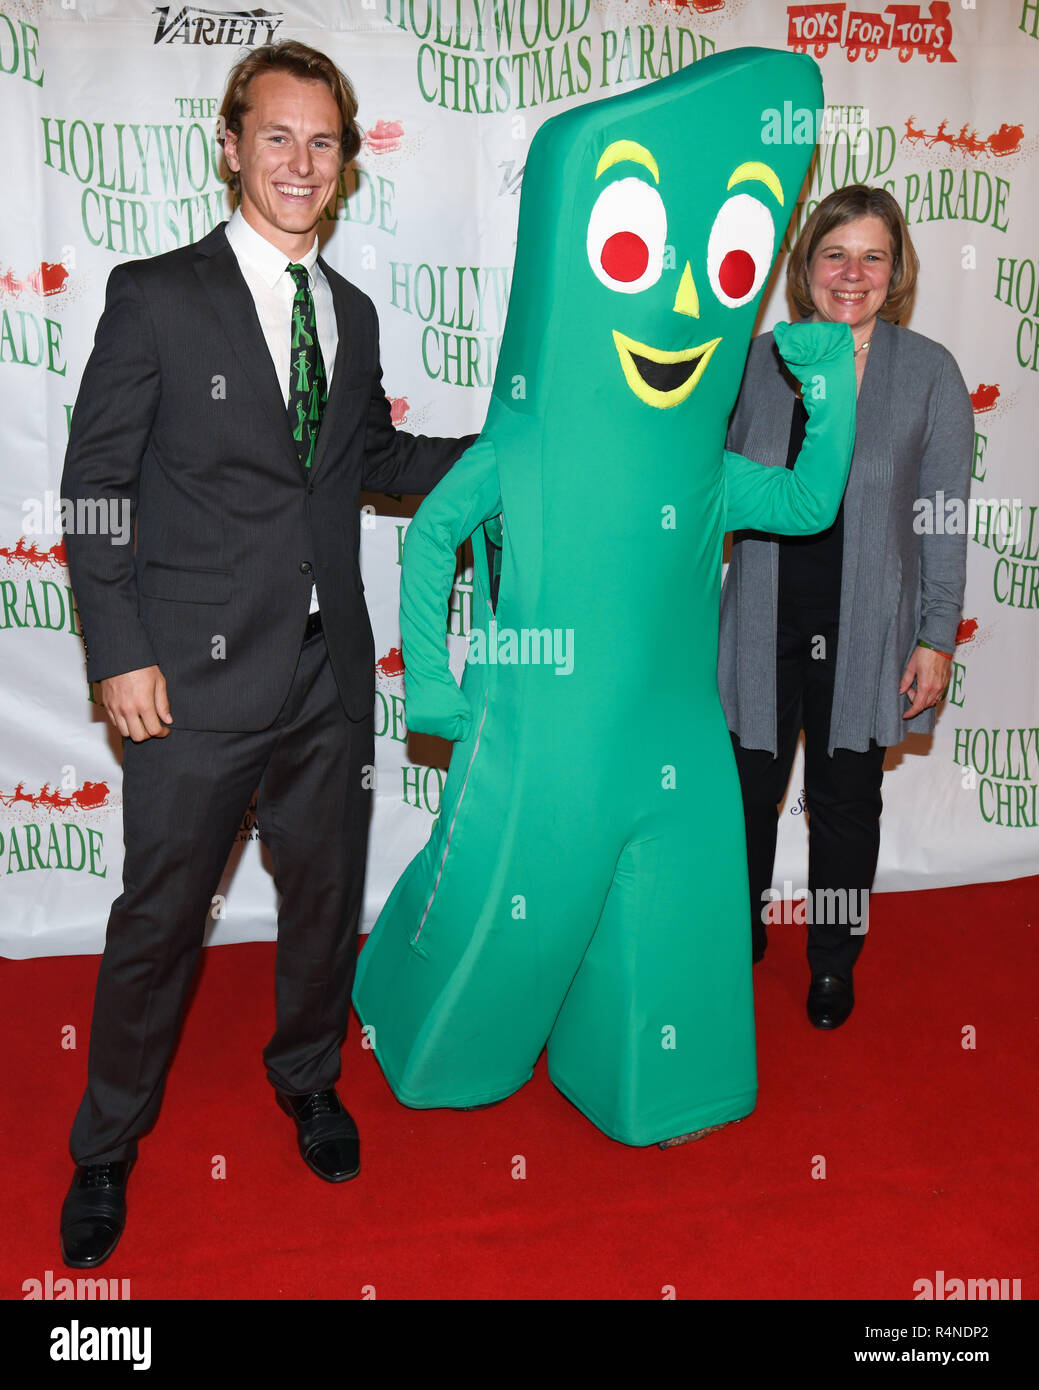 Gumby arrives at the 87th Annual Hollywood Christmas Parade in Hollywood California on November 25, 2018. Stock Photo